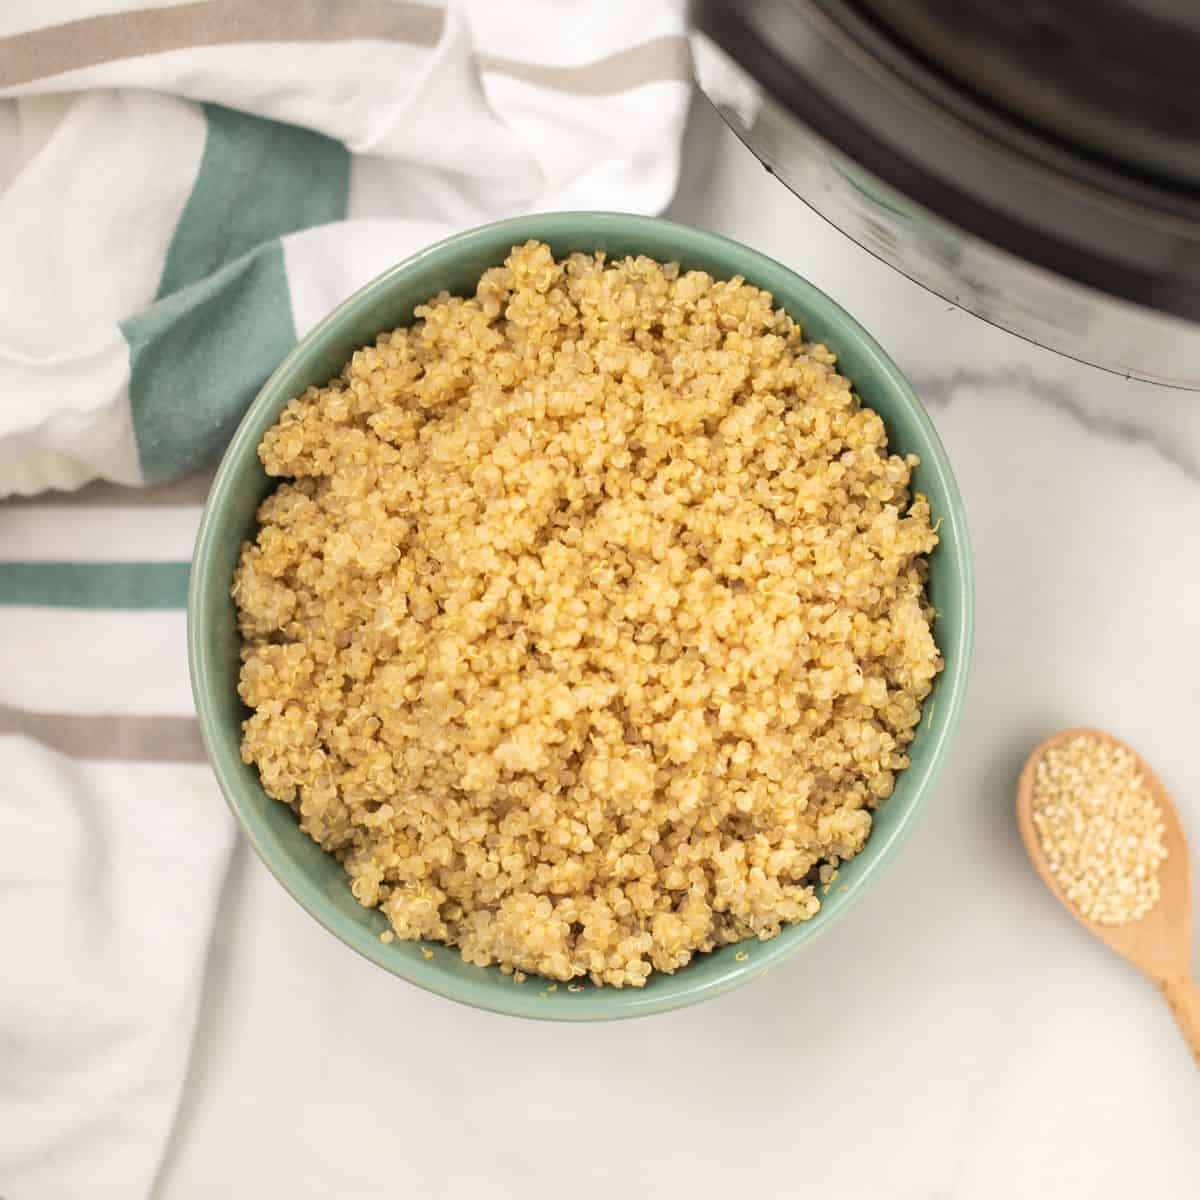 1-Minute Instant Pot Quinoa (Perfectly Fluffy!!)